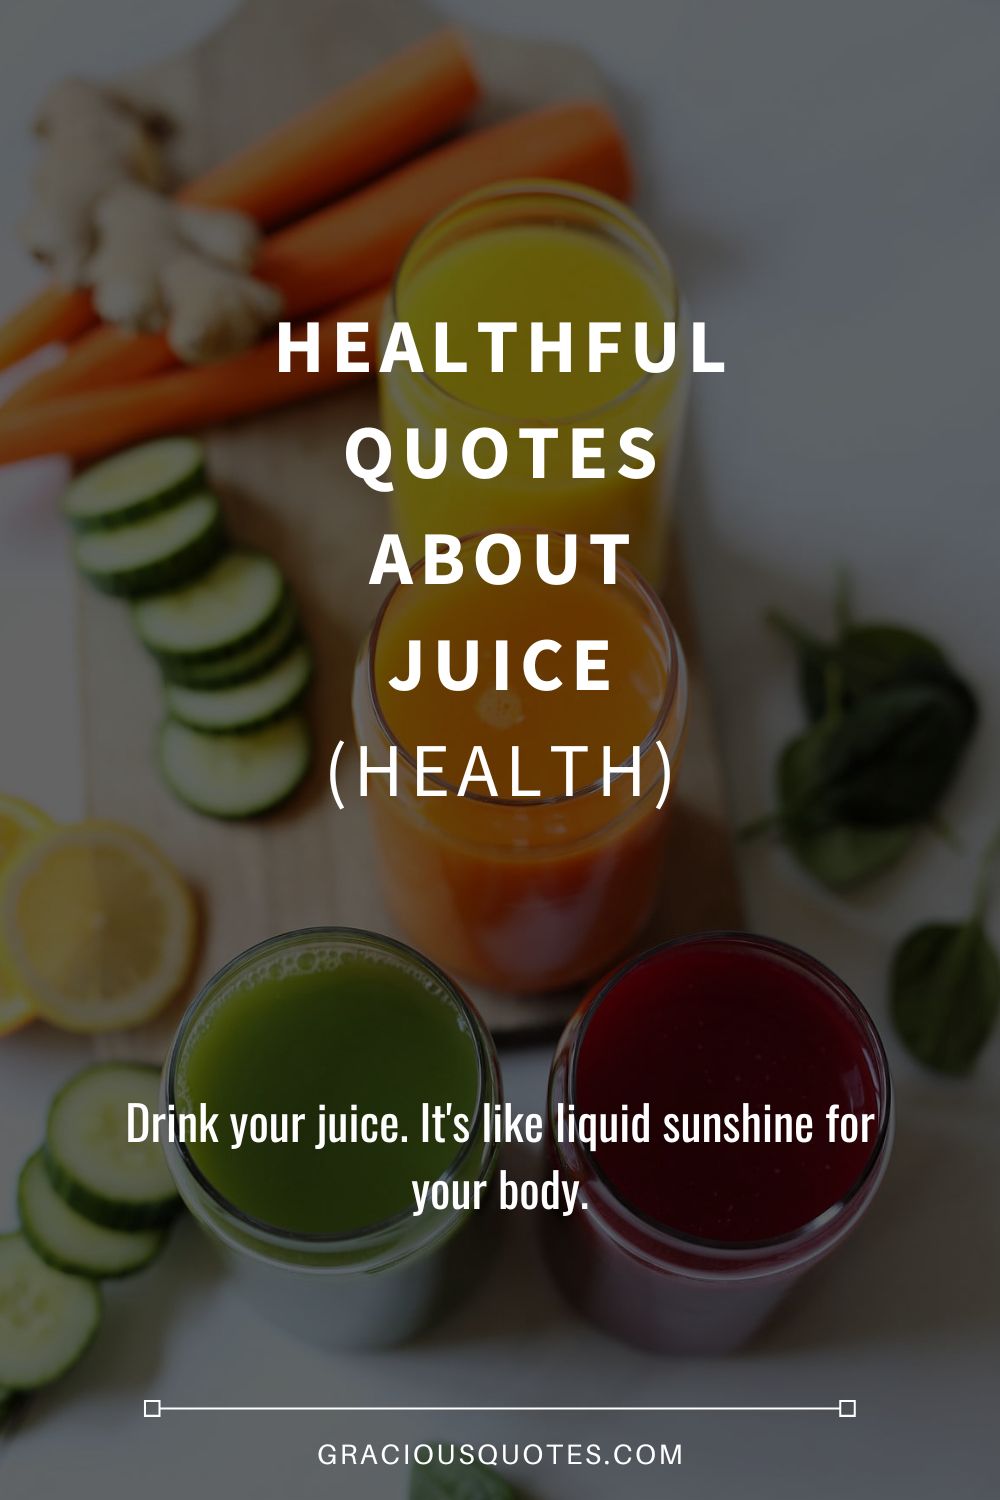 Healthful Quotes About Juice (HEALTH) - Gracious Quotes